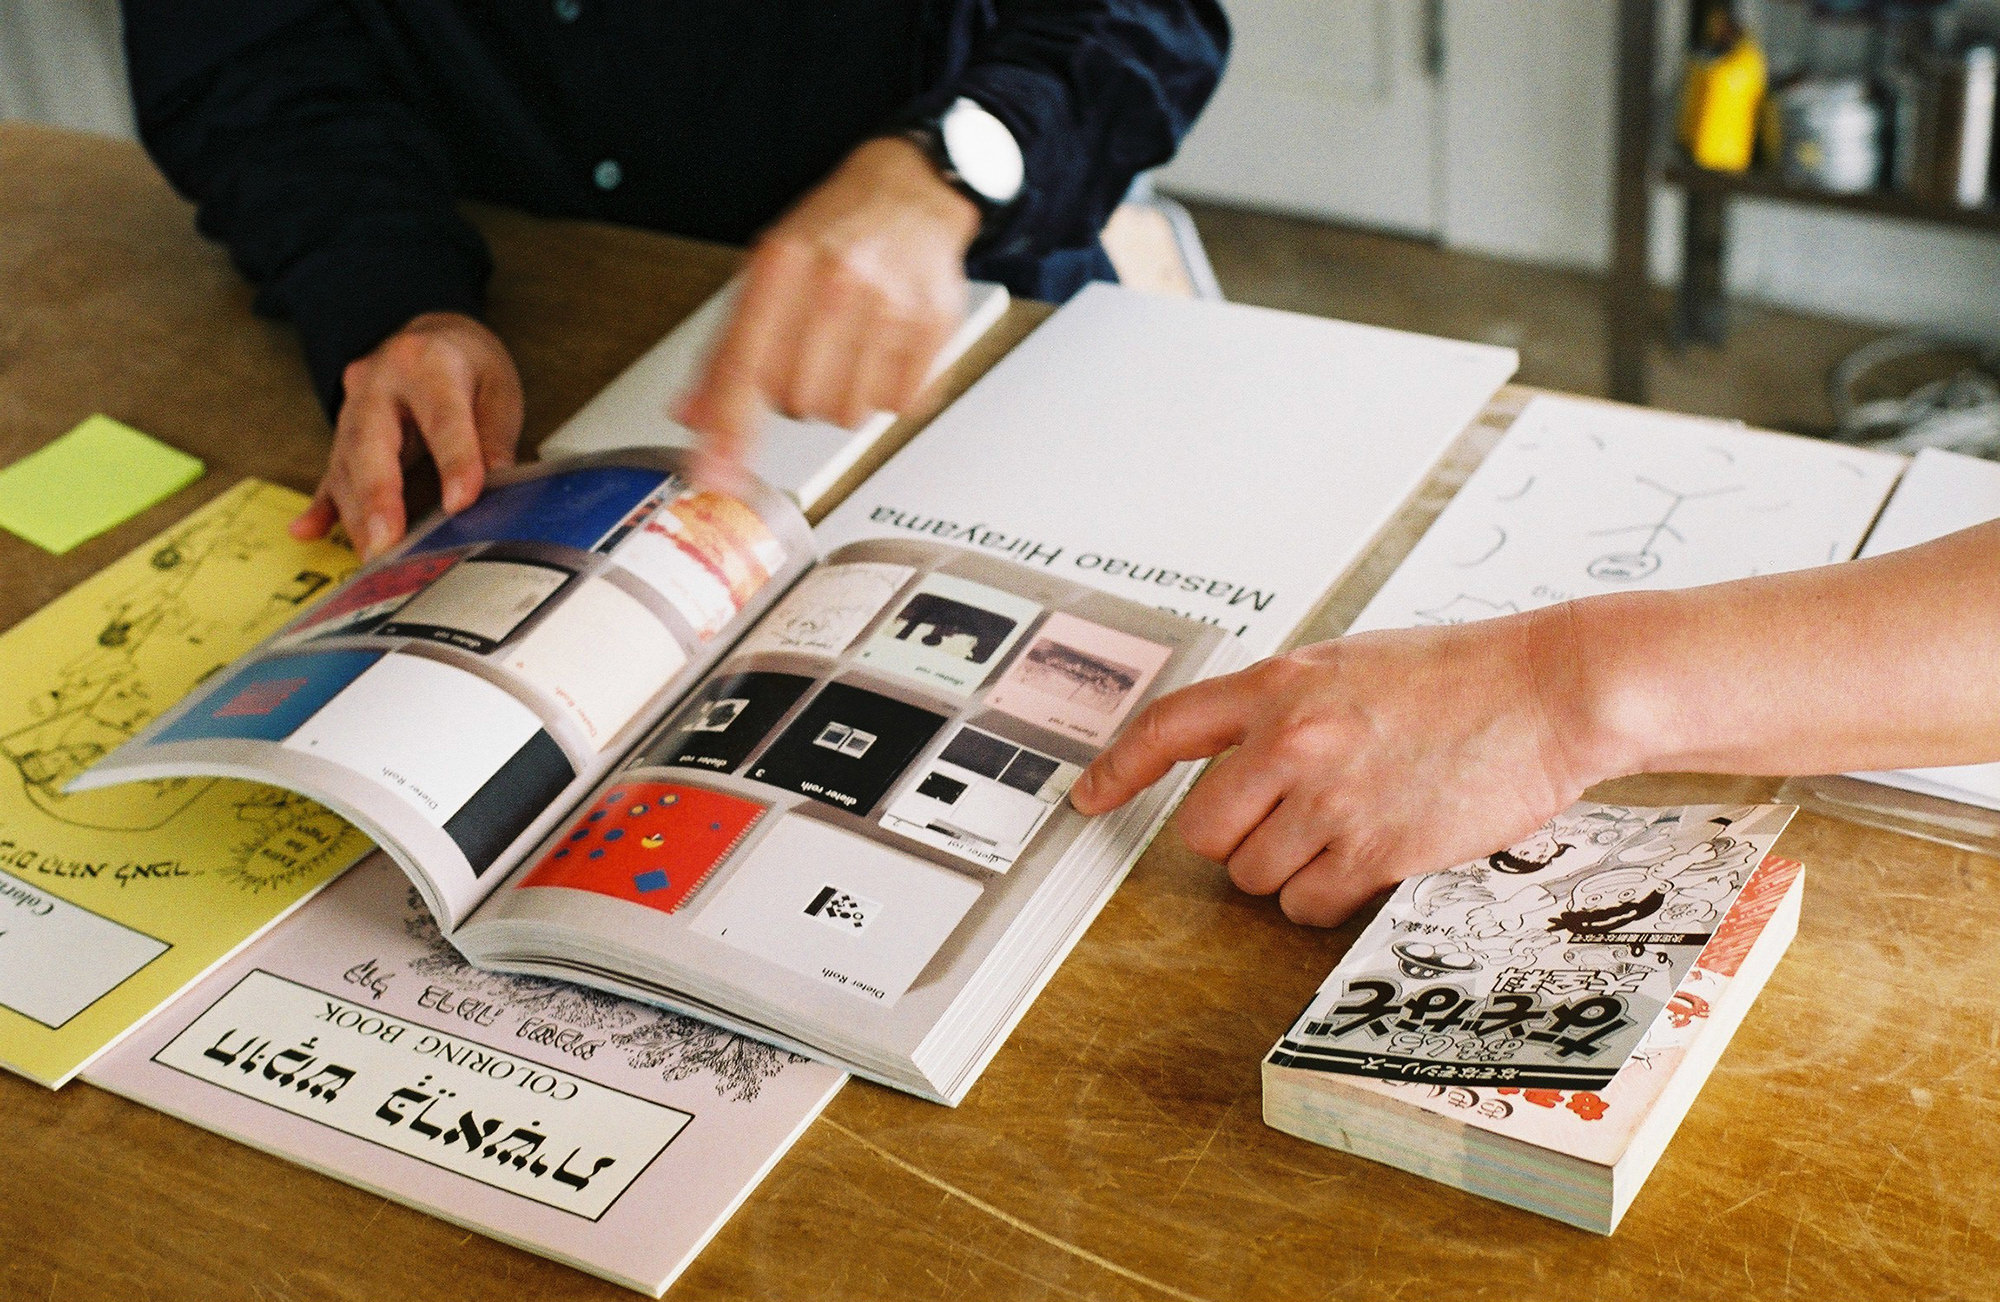 THE TOKYO ART BOOK FAIR  Japanese Artists' Books: Then and Now